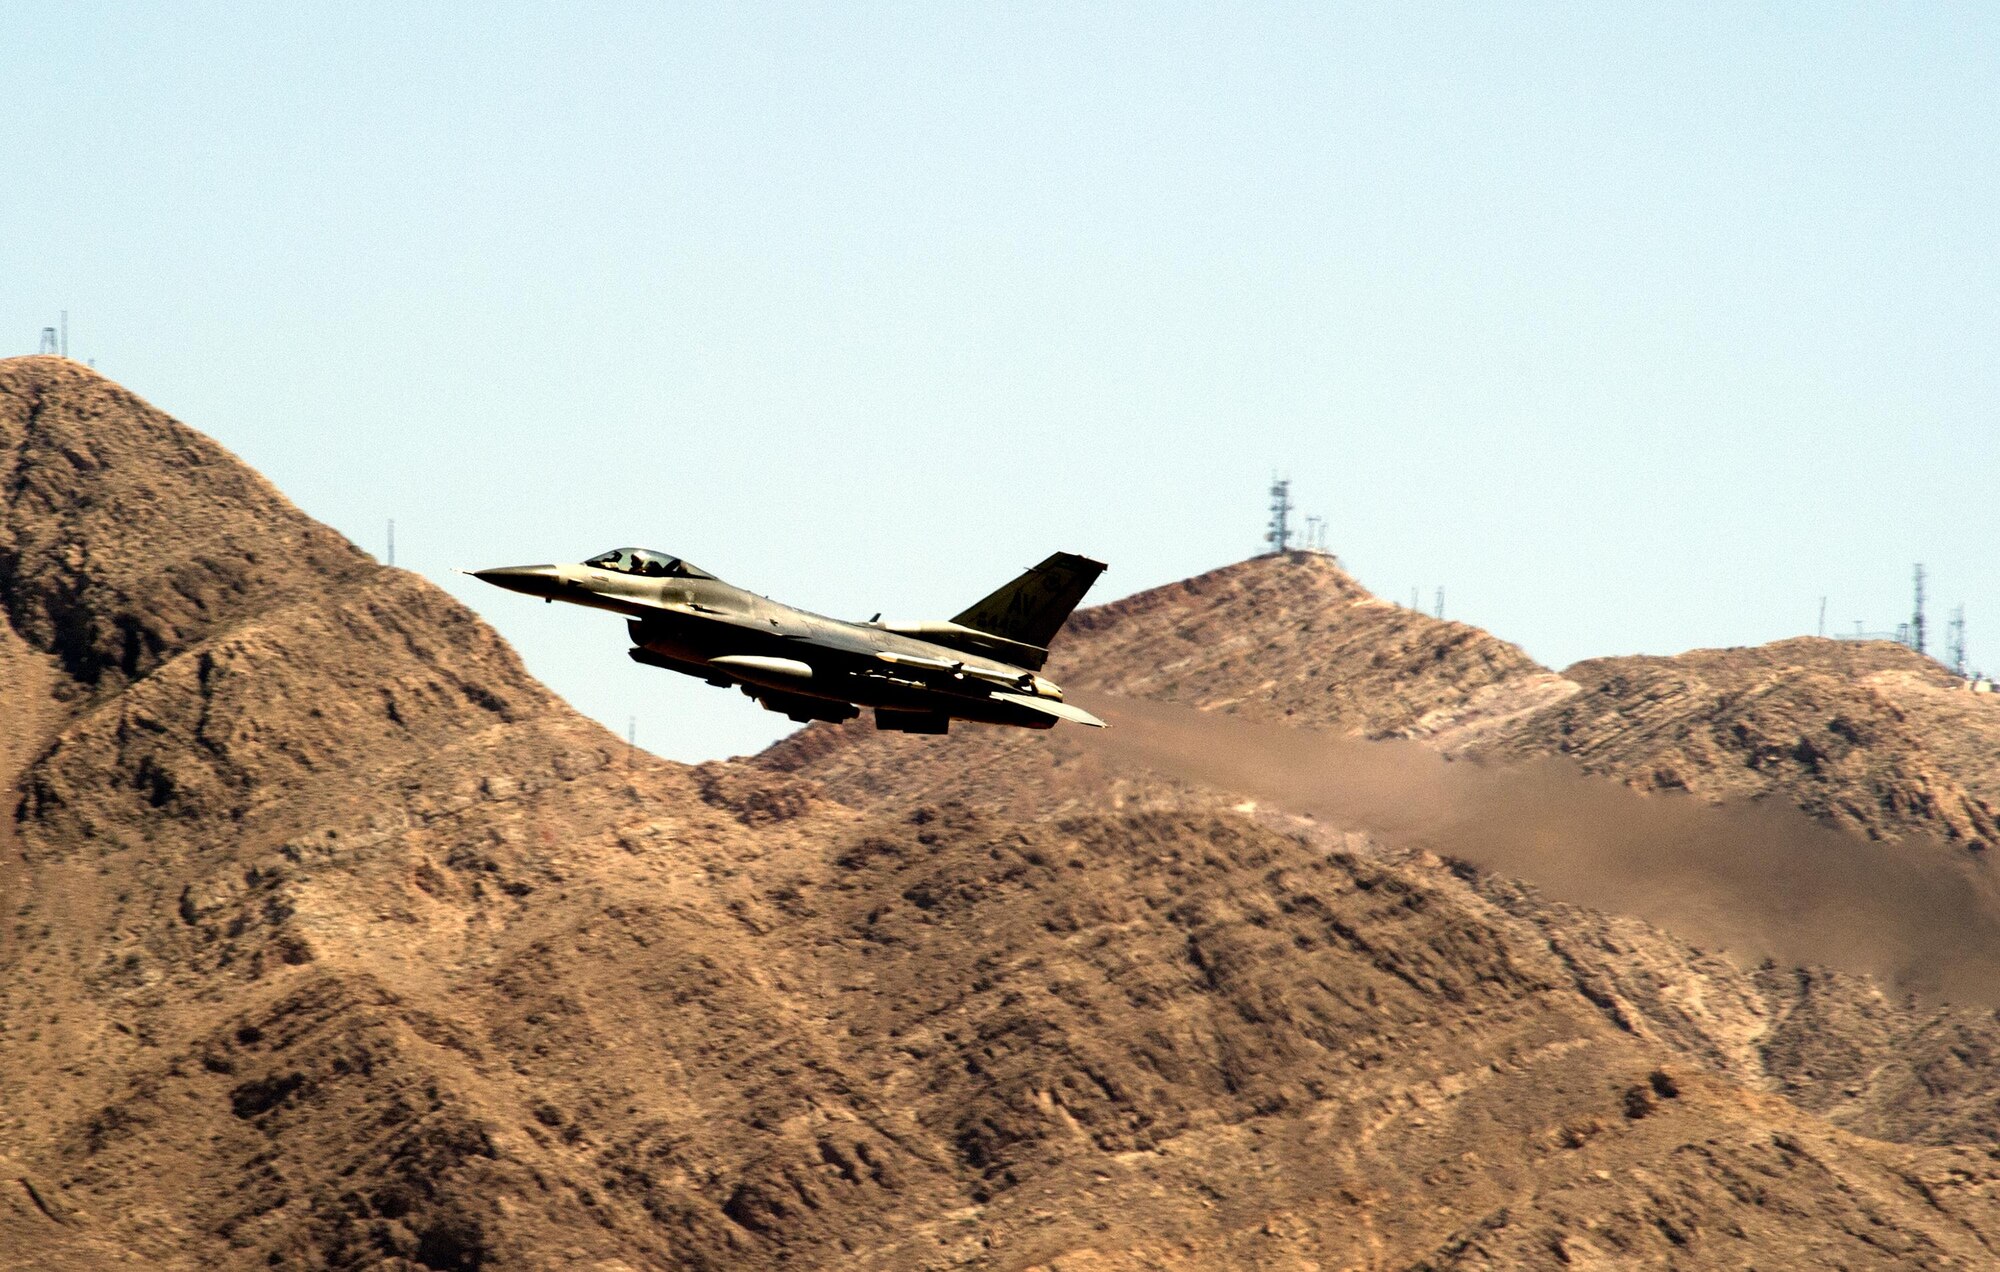 A 555th Fighter Squadron F-16 Fighting Falcon from Aviano Air Base, Italy, takes off from Nellis Air Force Base, Nevada, Monday, June 11, 2016, as part of Red Flag 16-3 exercise. Red Flag is the service’s premier air-to-air combat training exercise and one of a series of advanced training programs administered by the U.S. Air Force Warfare Center and executed through the 414th Combat Training Squadron. (U.S. Air Force photo/Tech. Sgt. Julius Delos Reyes)